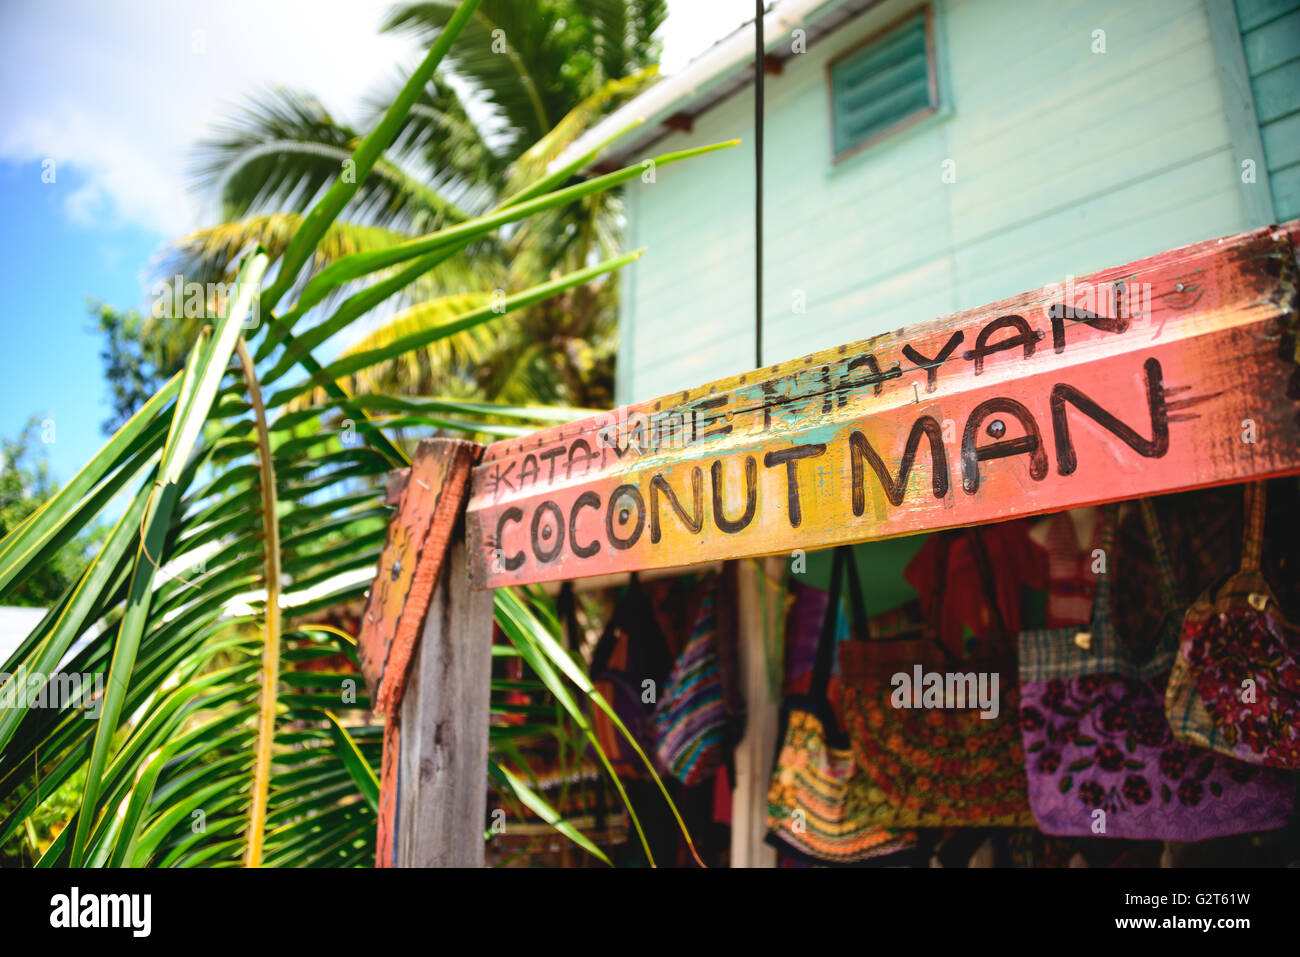 Art work and market stalls in Placencia, Belize Stock Photo